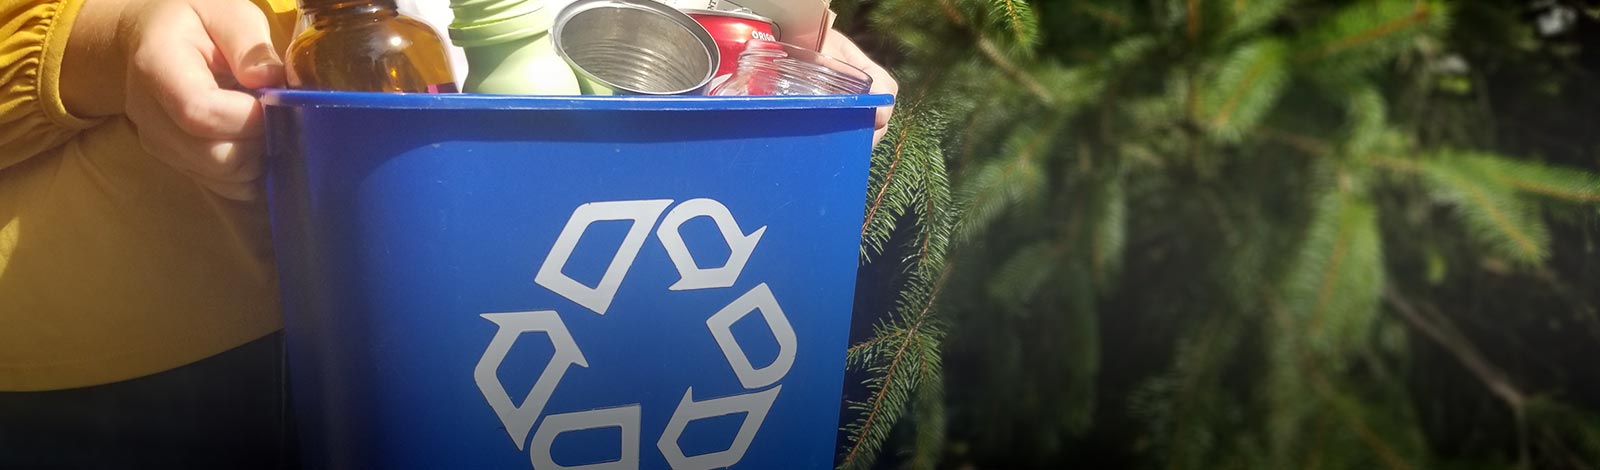 Ocean County’s recycling efforts, news, tips and more.